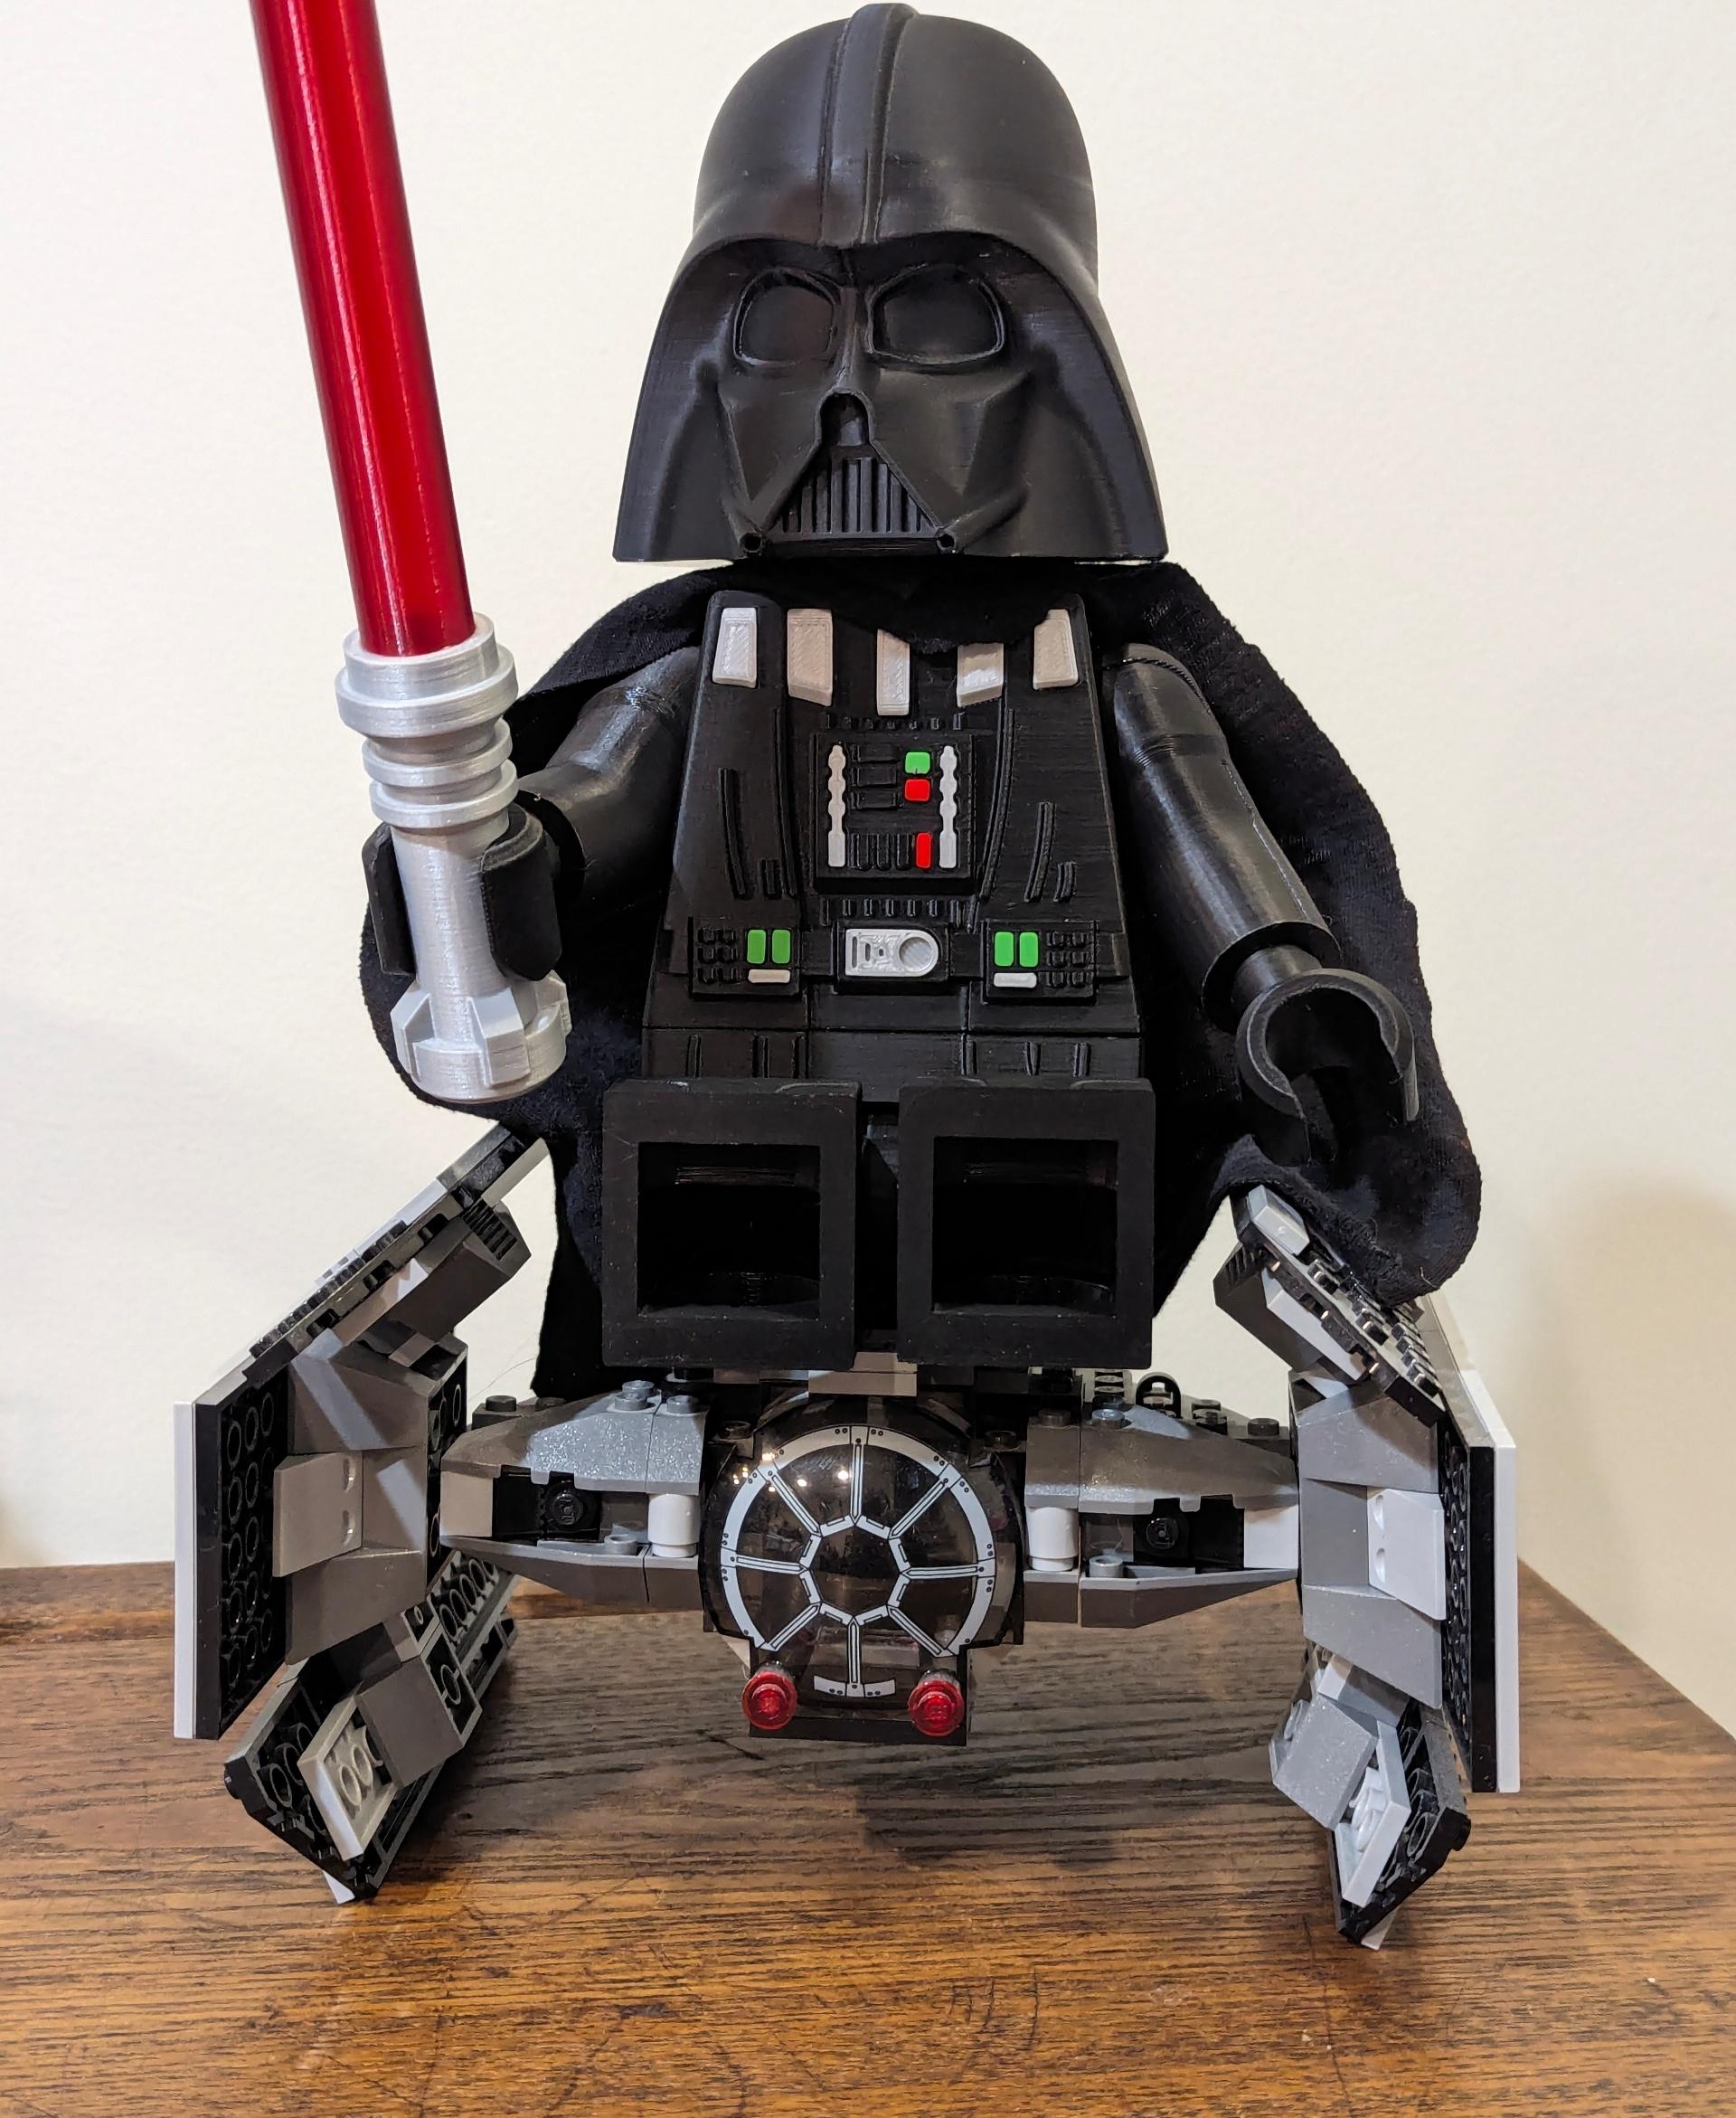 Darth Vader (6:1 LEGO-inspired brick figure, NO MMU/AMS, NO supports, NO glue) - Printed in
Printed Solid Black and Green
Polymaker Metallic Silver 
Prusament Lipstick Red
Coex Translucent Blood Red - 3d model